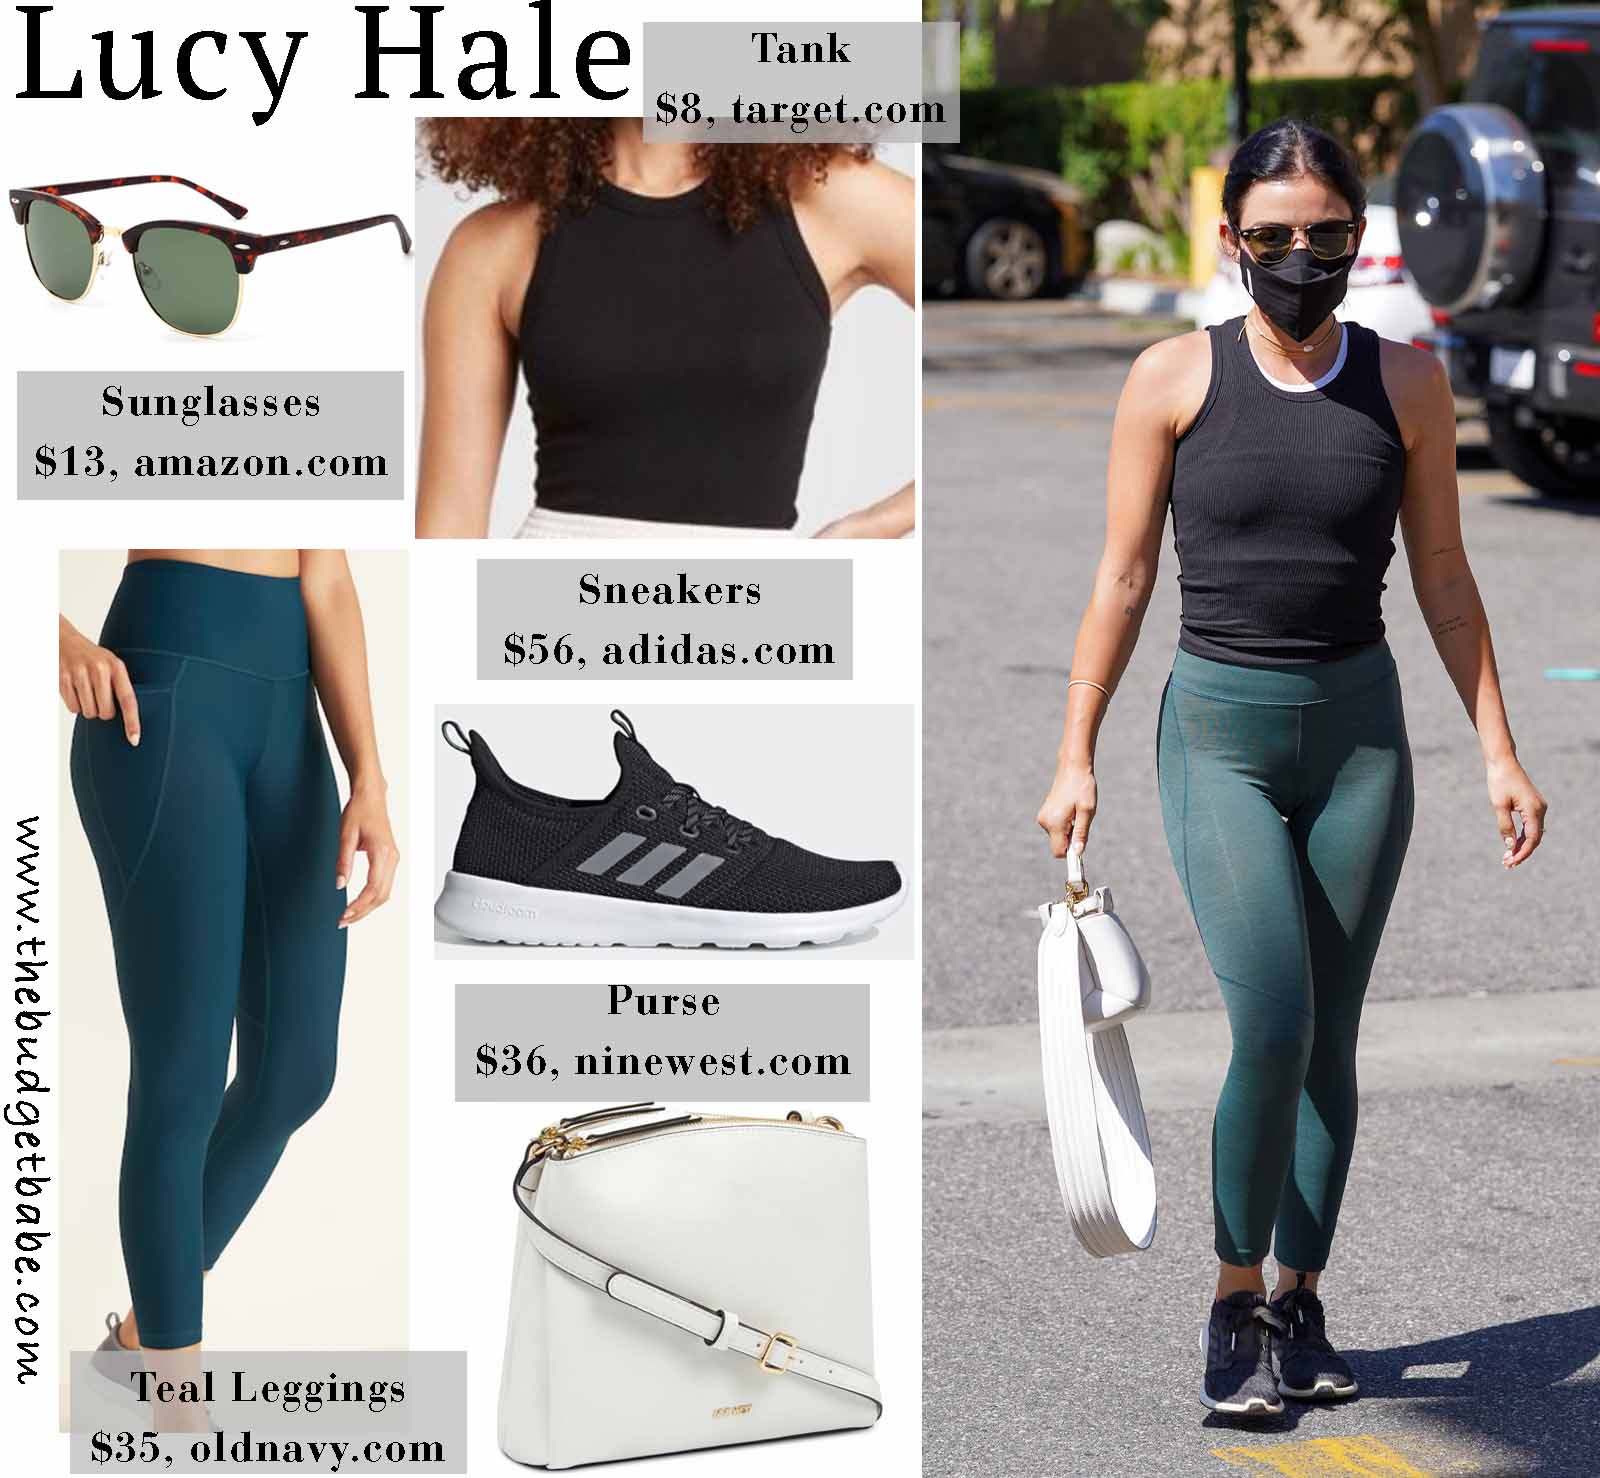 Get The Look: Lucy Hale's Teal Activewear Leggings and Adidas Edge 3 Lux Sneakers